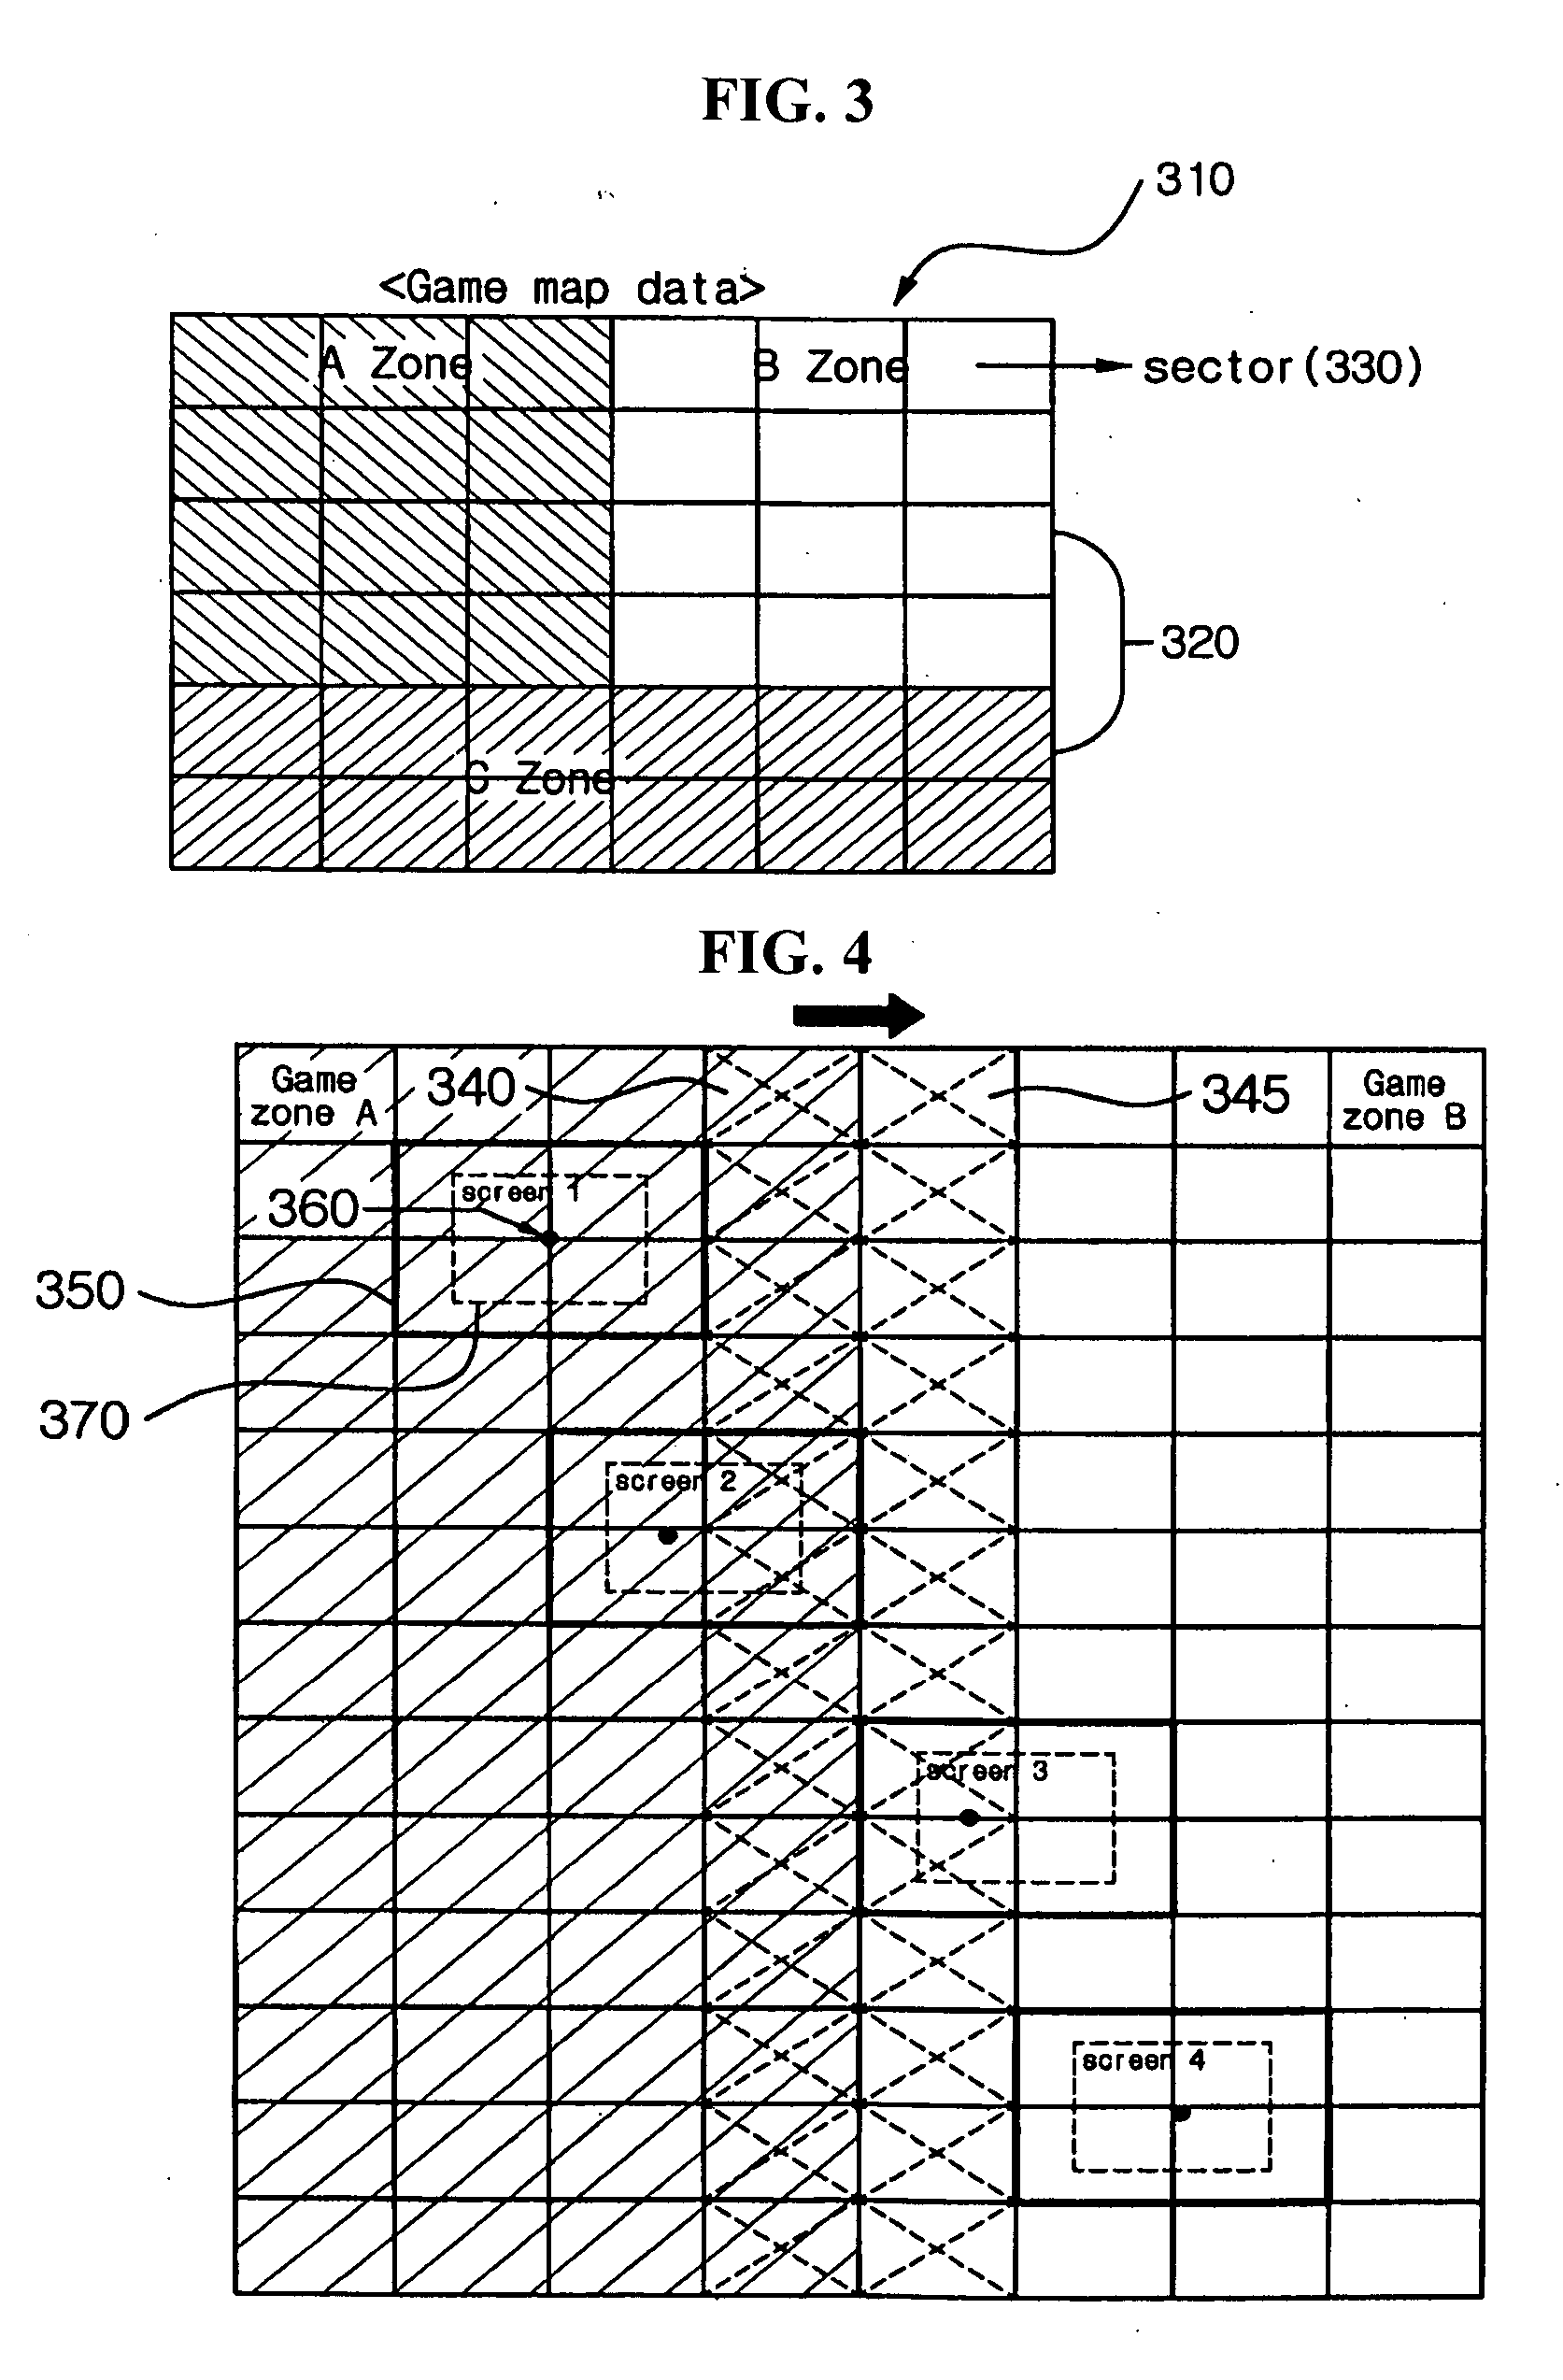 Method for processing the data distributed at online game server and a system thereof